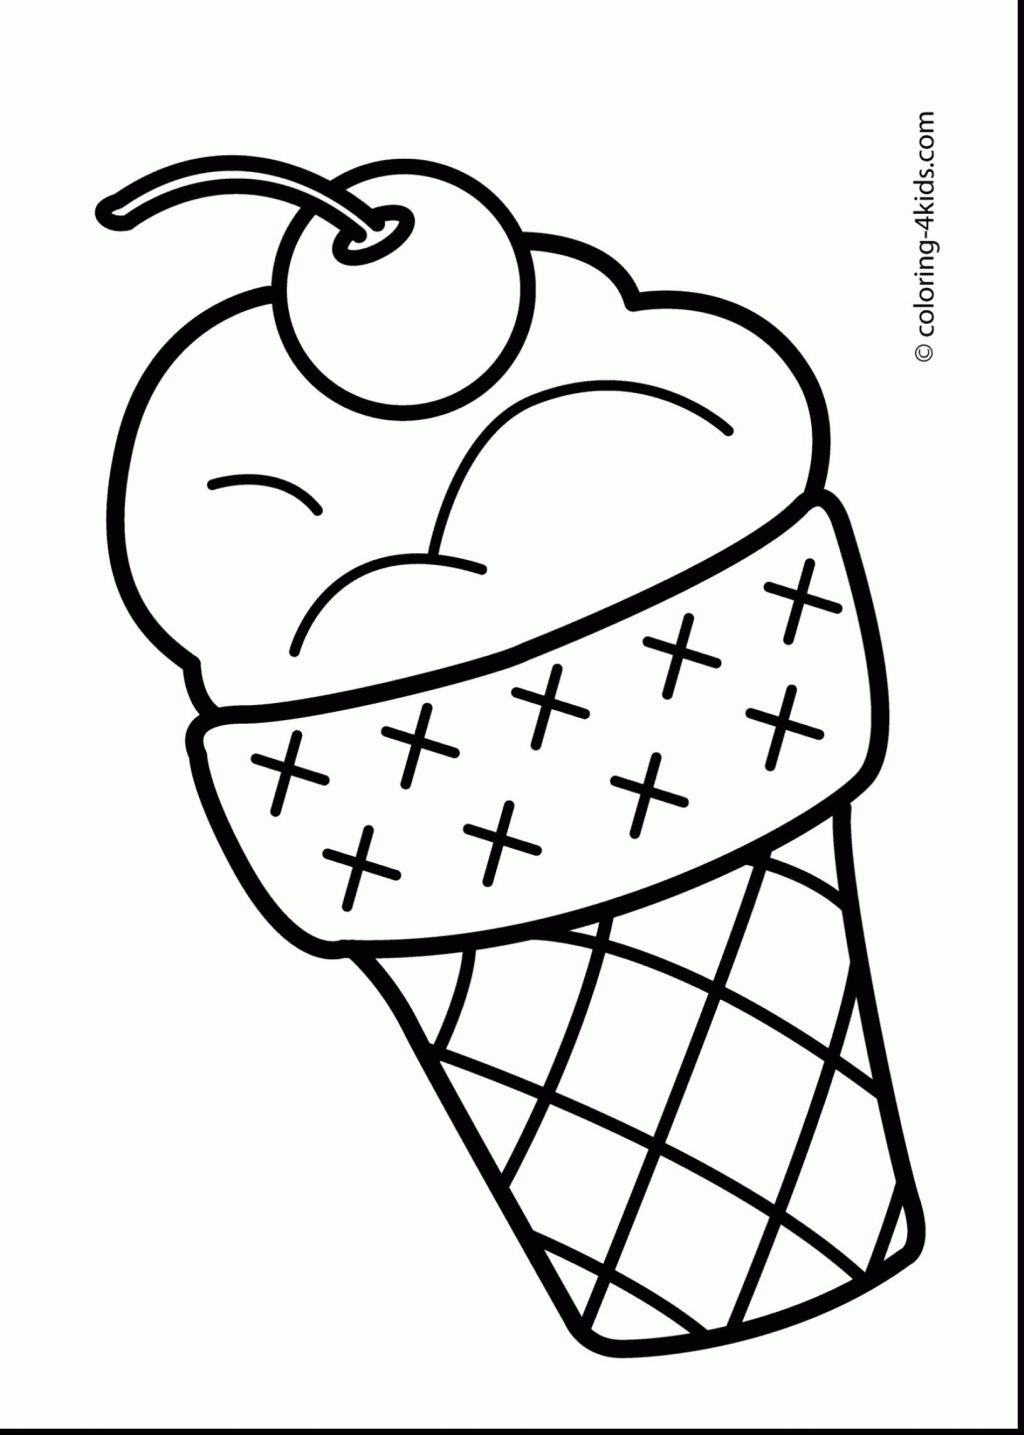 coloring-pages-free-for-kids-coloring-pages